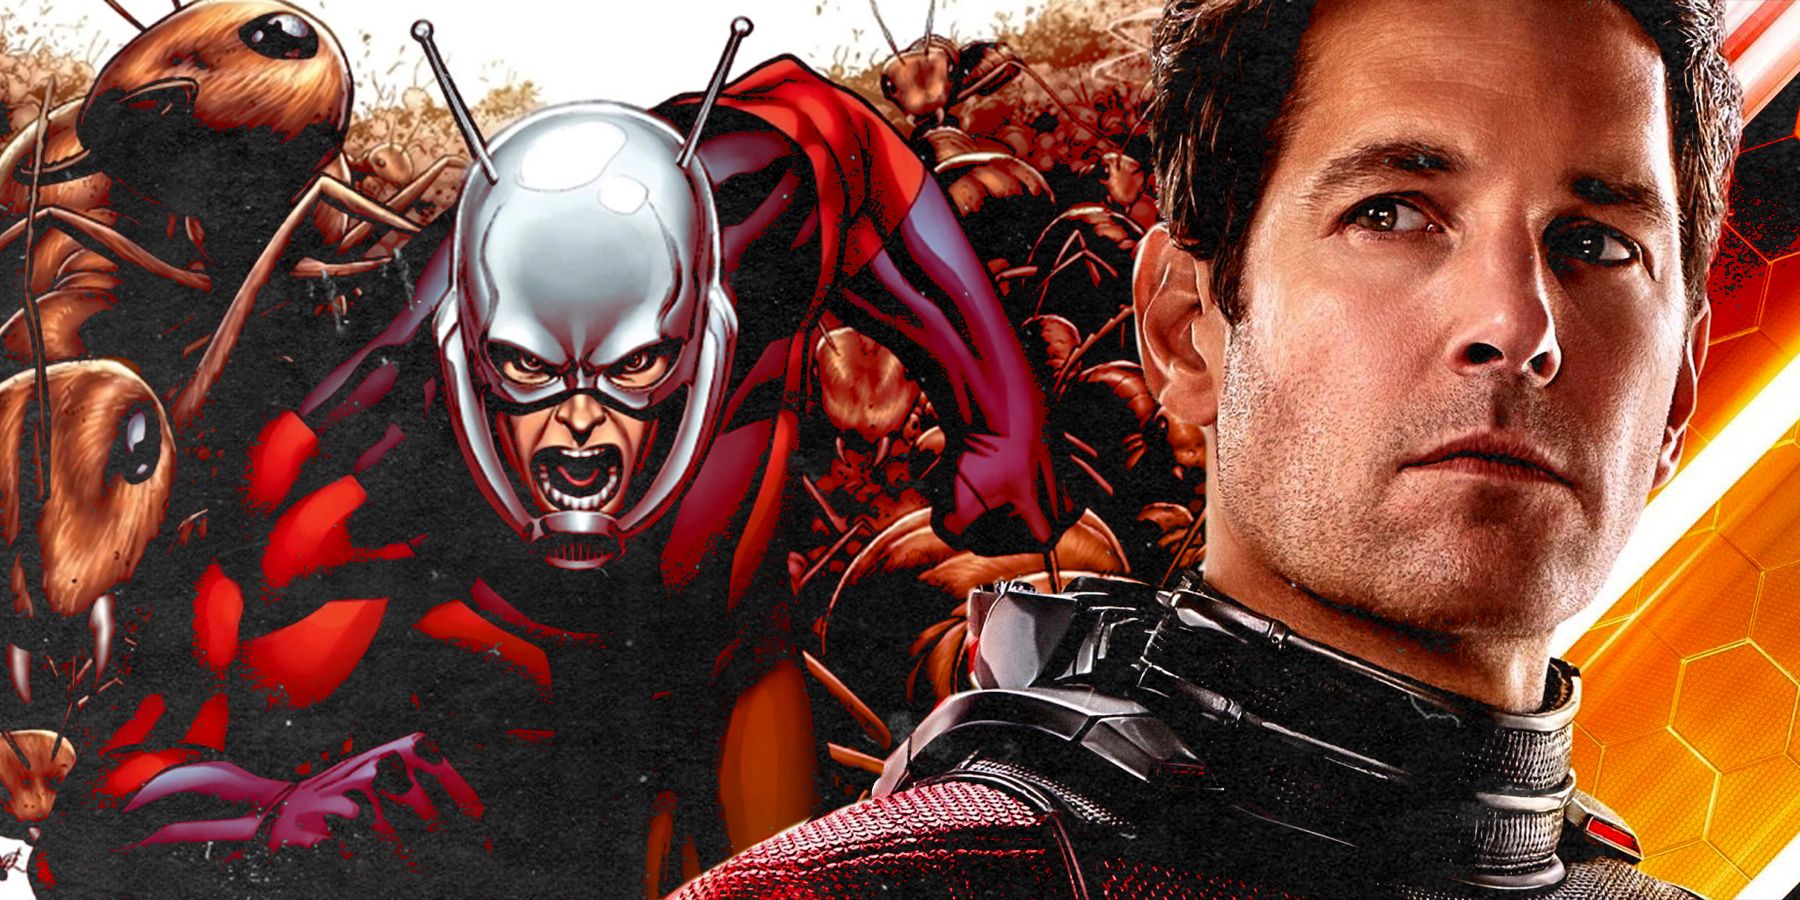 How Al Ewing and Tom Reilly's Ant-Man #1 redefines one of Marvel's